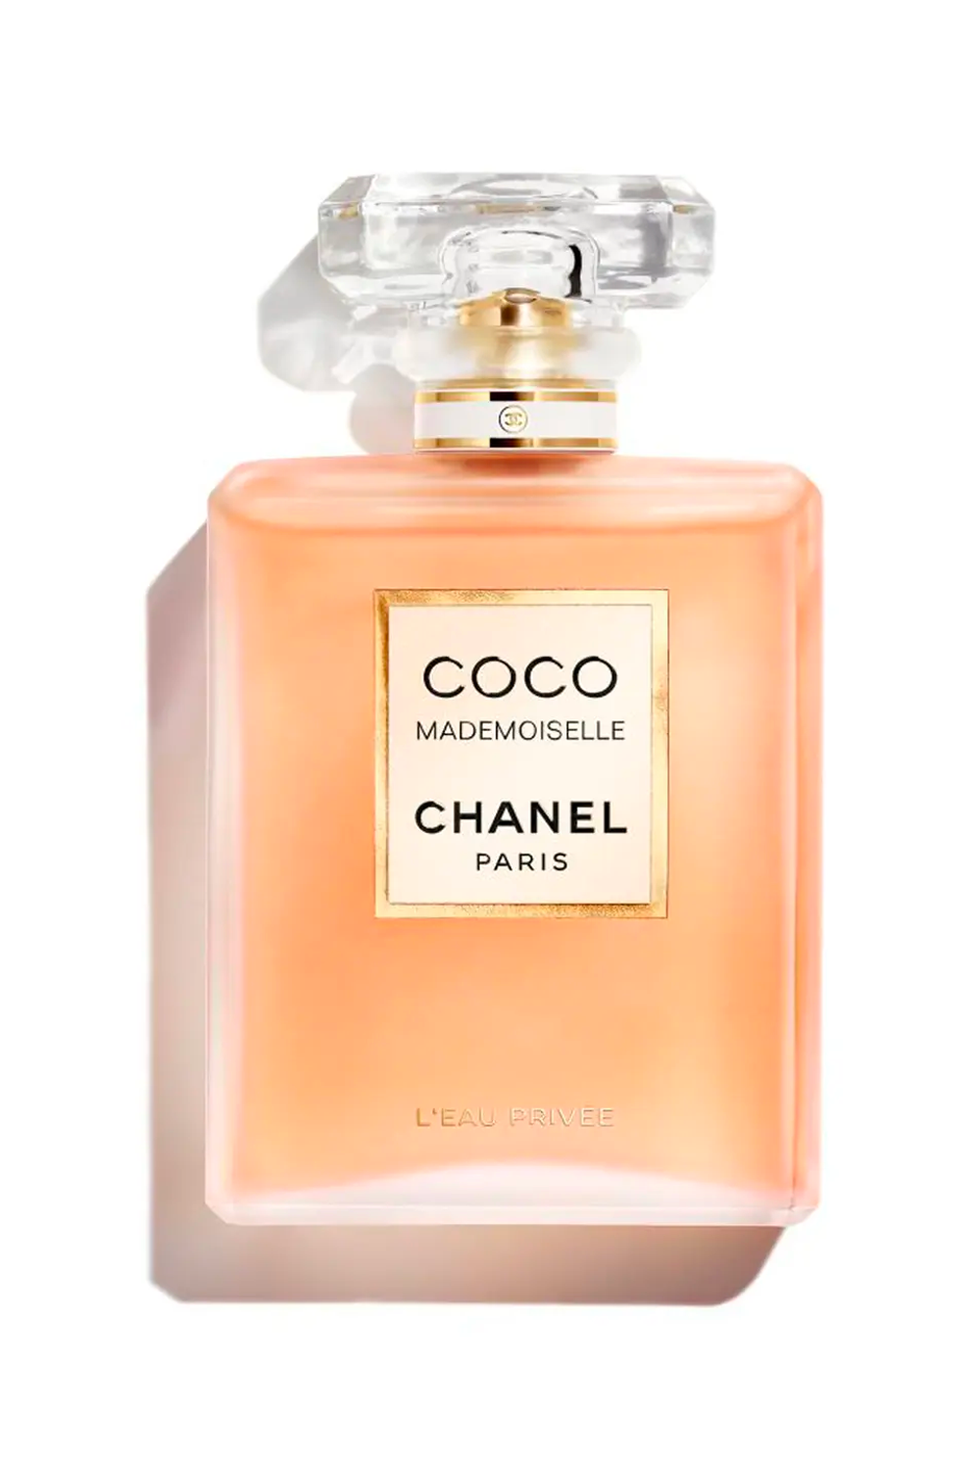 36 Best Spring Perfumes and Fragrances for 2023